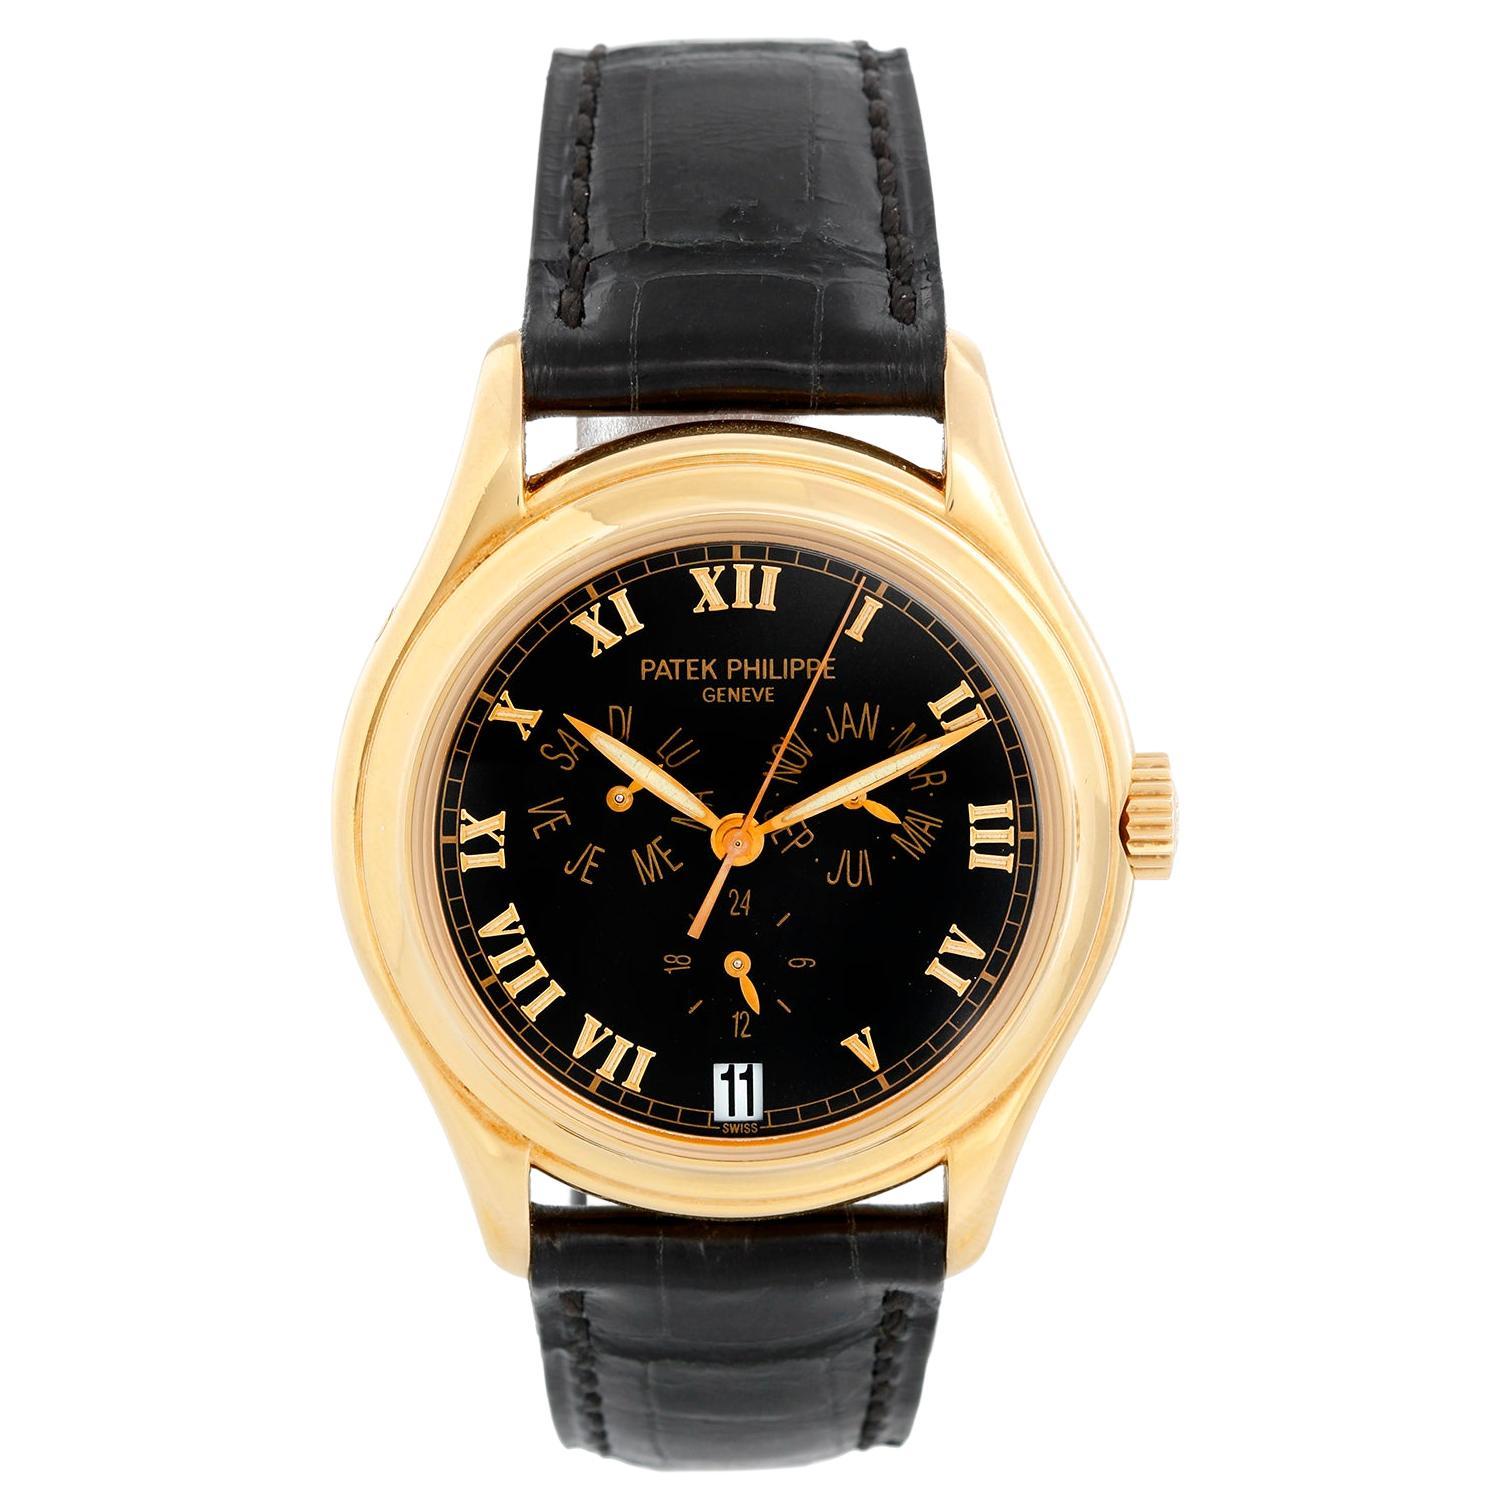 Patek Philippe Annular Calendar 18k Yellow Gold Men's Watch 5035 J (or 5035j) - Automatic winding. 18K yellow gold case with exposition back to view movement (37mm diameter). Black dial with raised gold Roman numerals; triple calendar & 24 hour